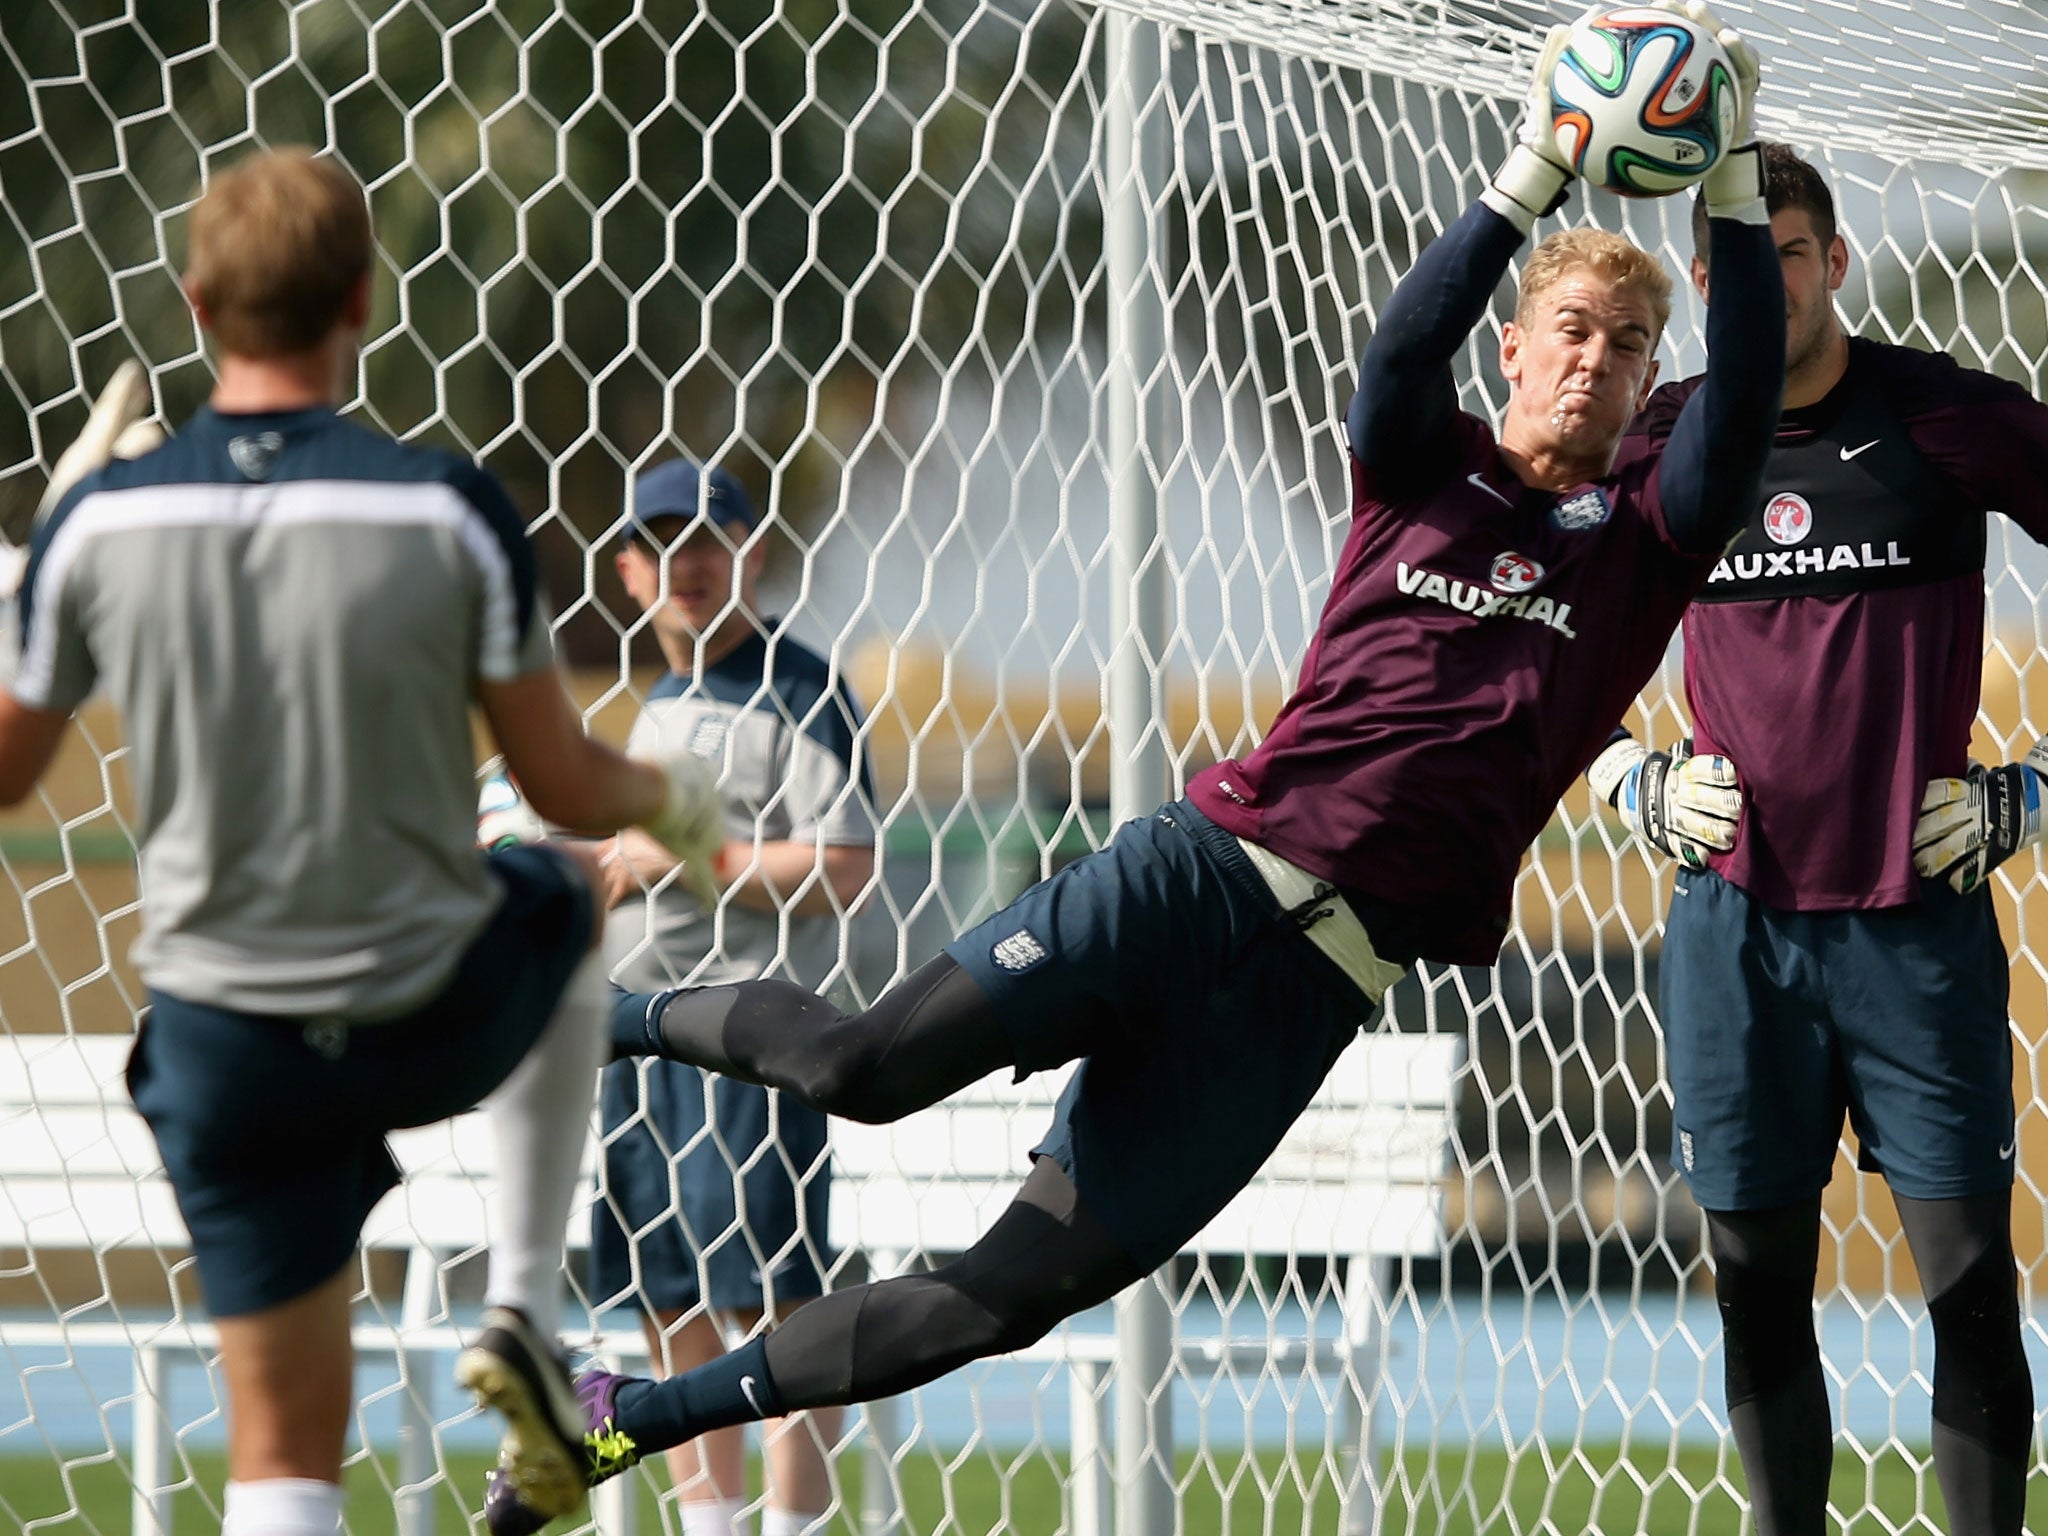 Joe Hart makes a save during England training in Rio this week